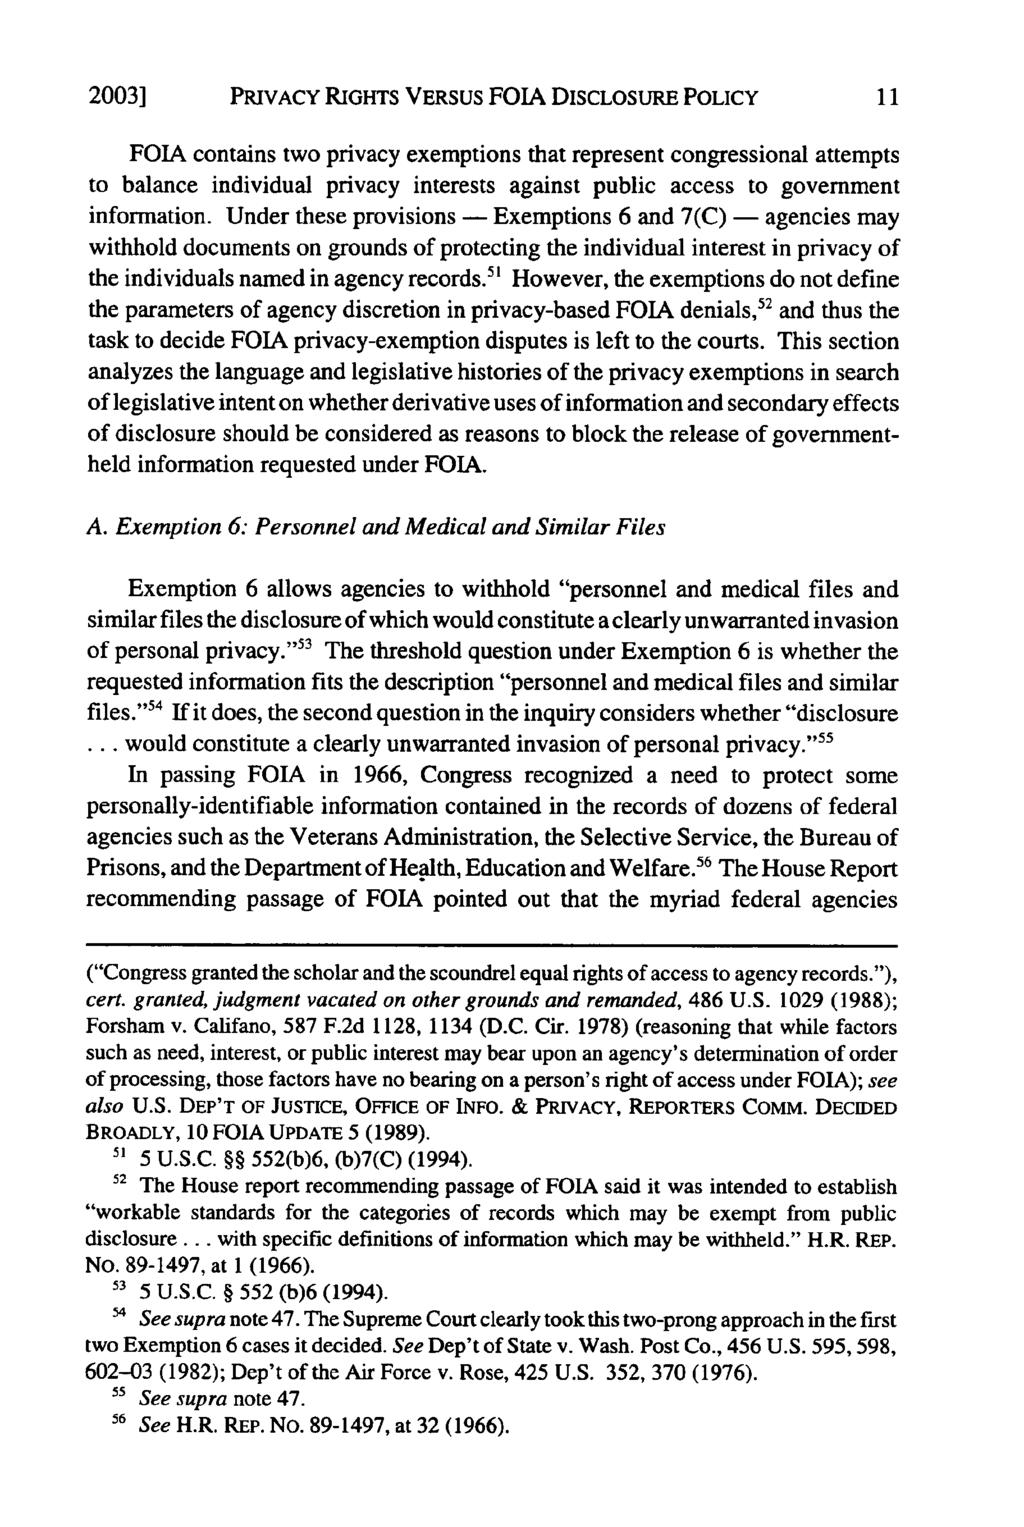 2003] PRIVACY RIGHTS VERSUS FOIA DISCLOSURE POLICY FOIA contains two privacy exemptions that represent congressional attempts to balance individual privacy interests against public access to